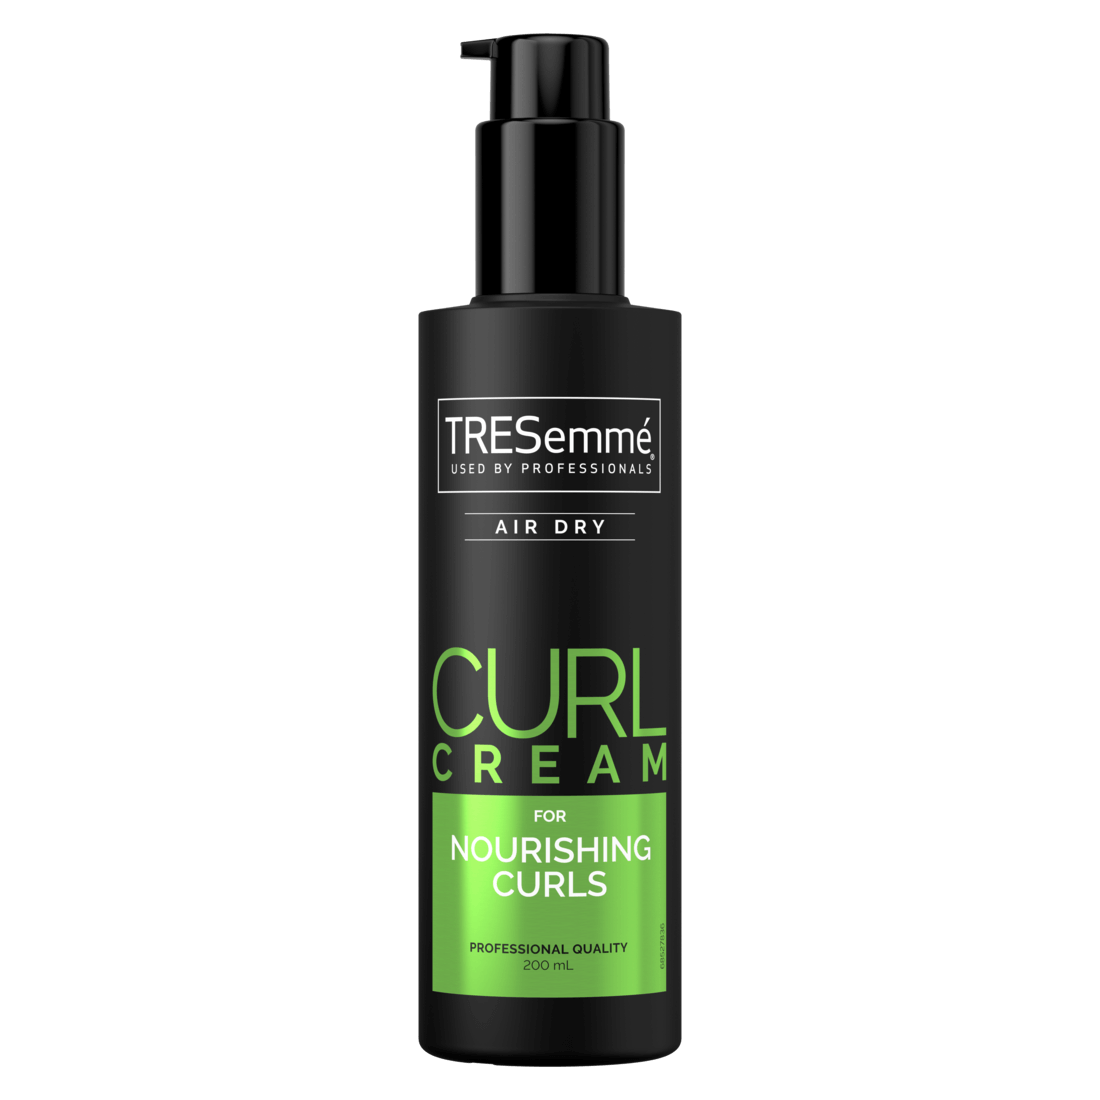 A 200ml bottle of TRESemme Air Dry curl cream Front of Pack